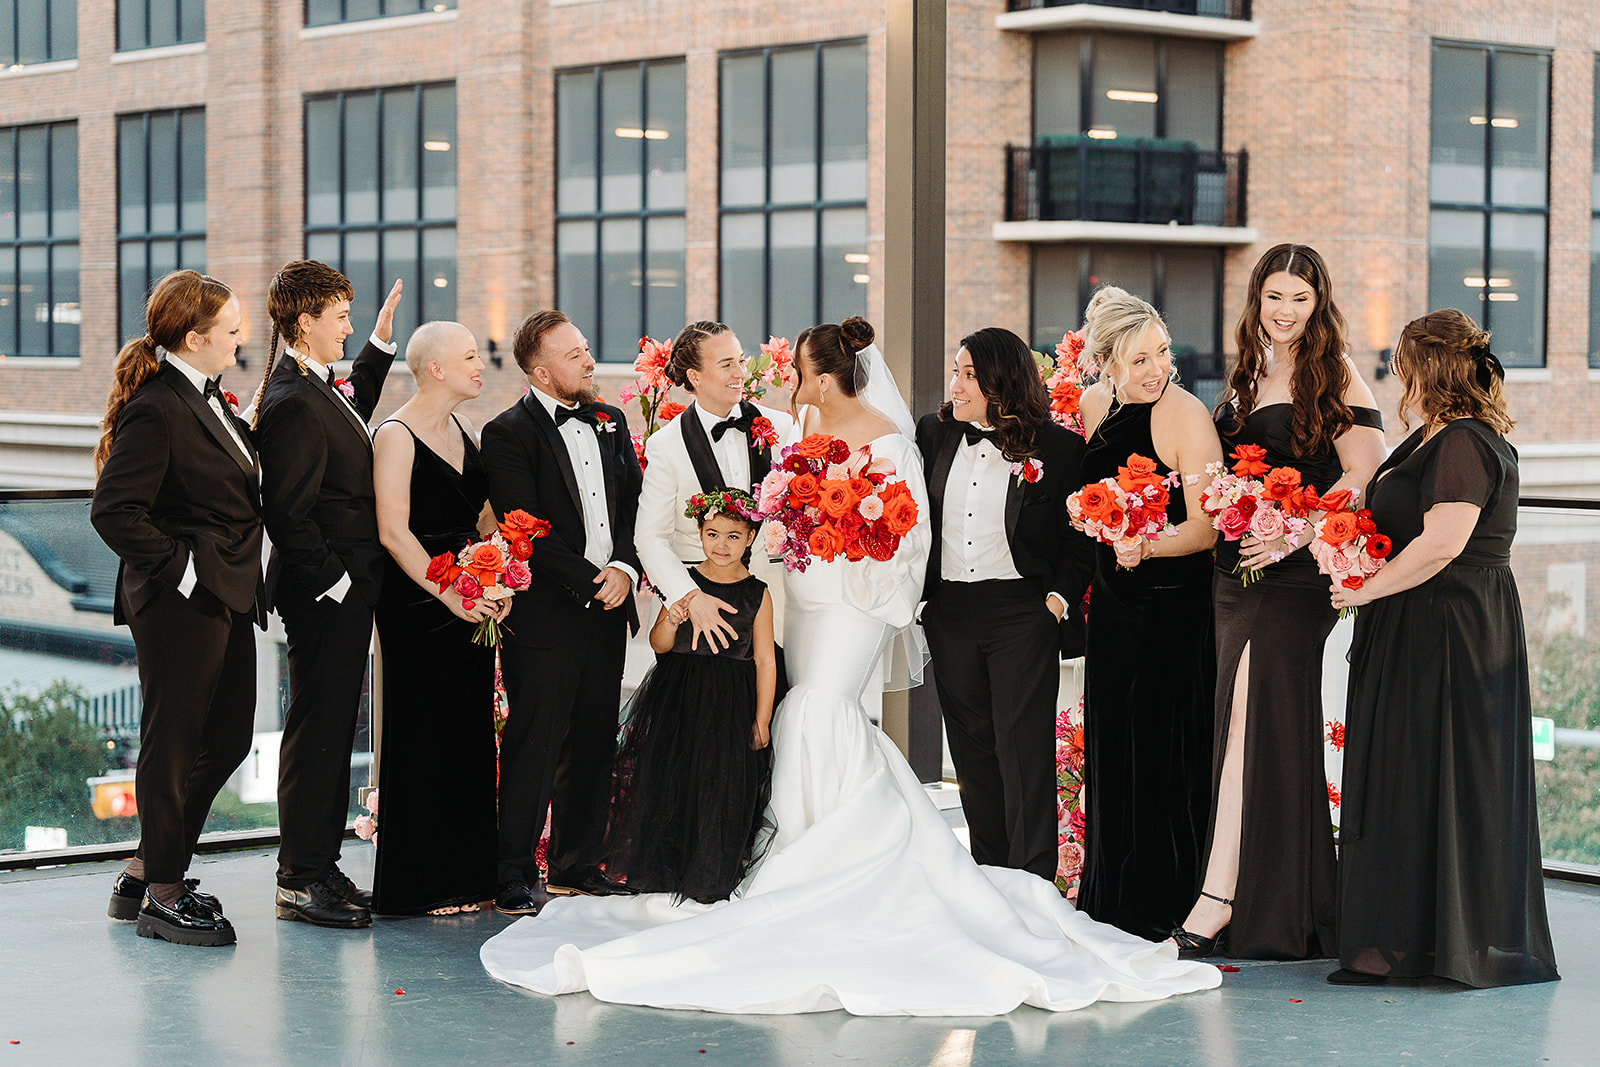 Wedding party wearing all black with brides, holding red and pink bouquets